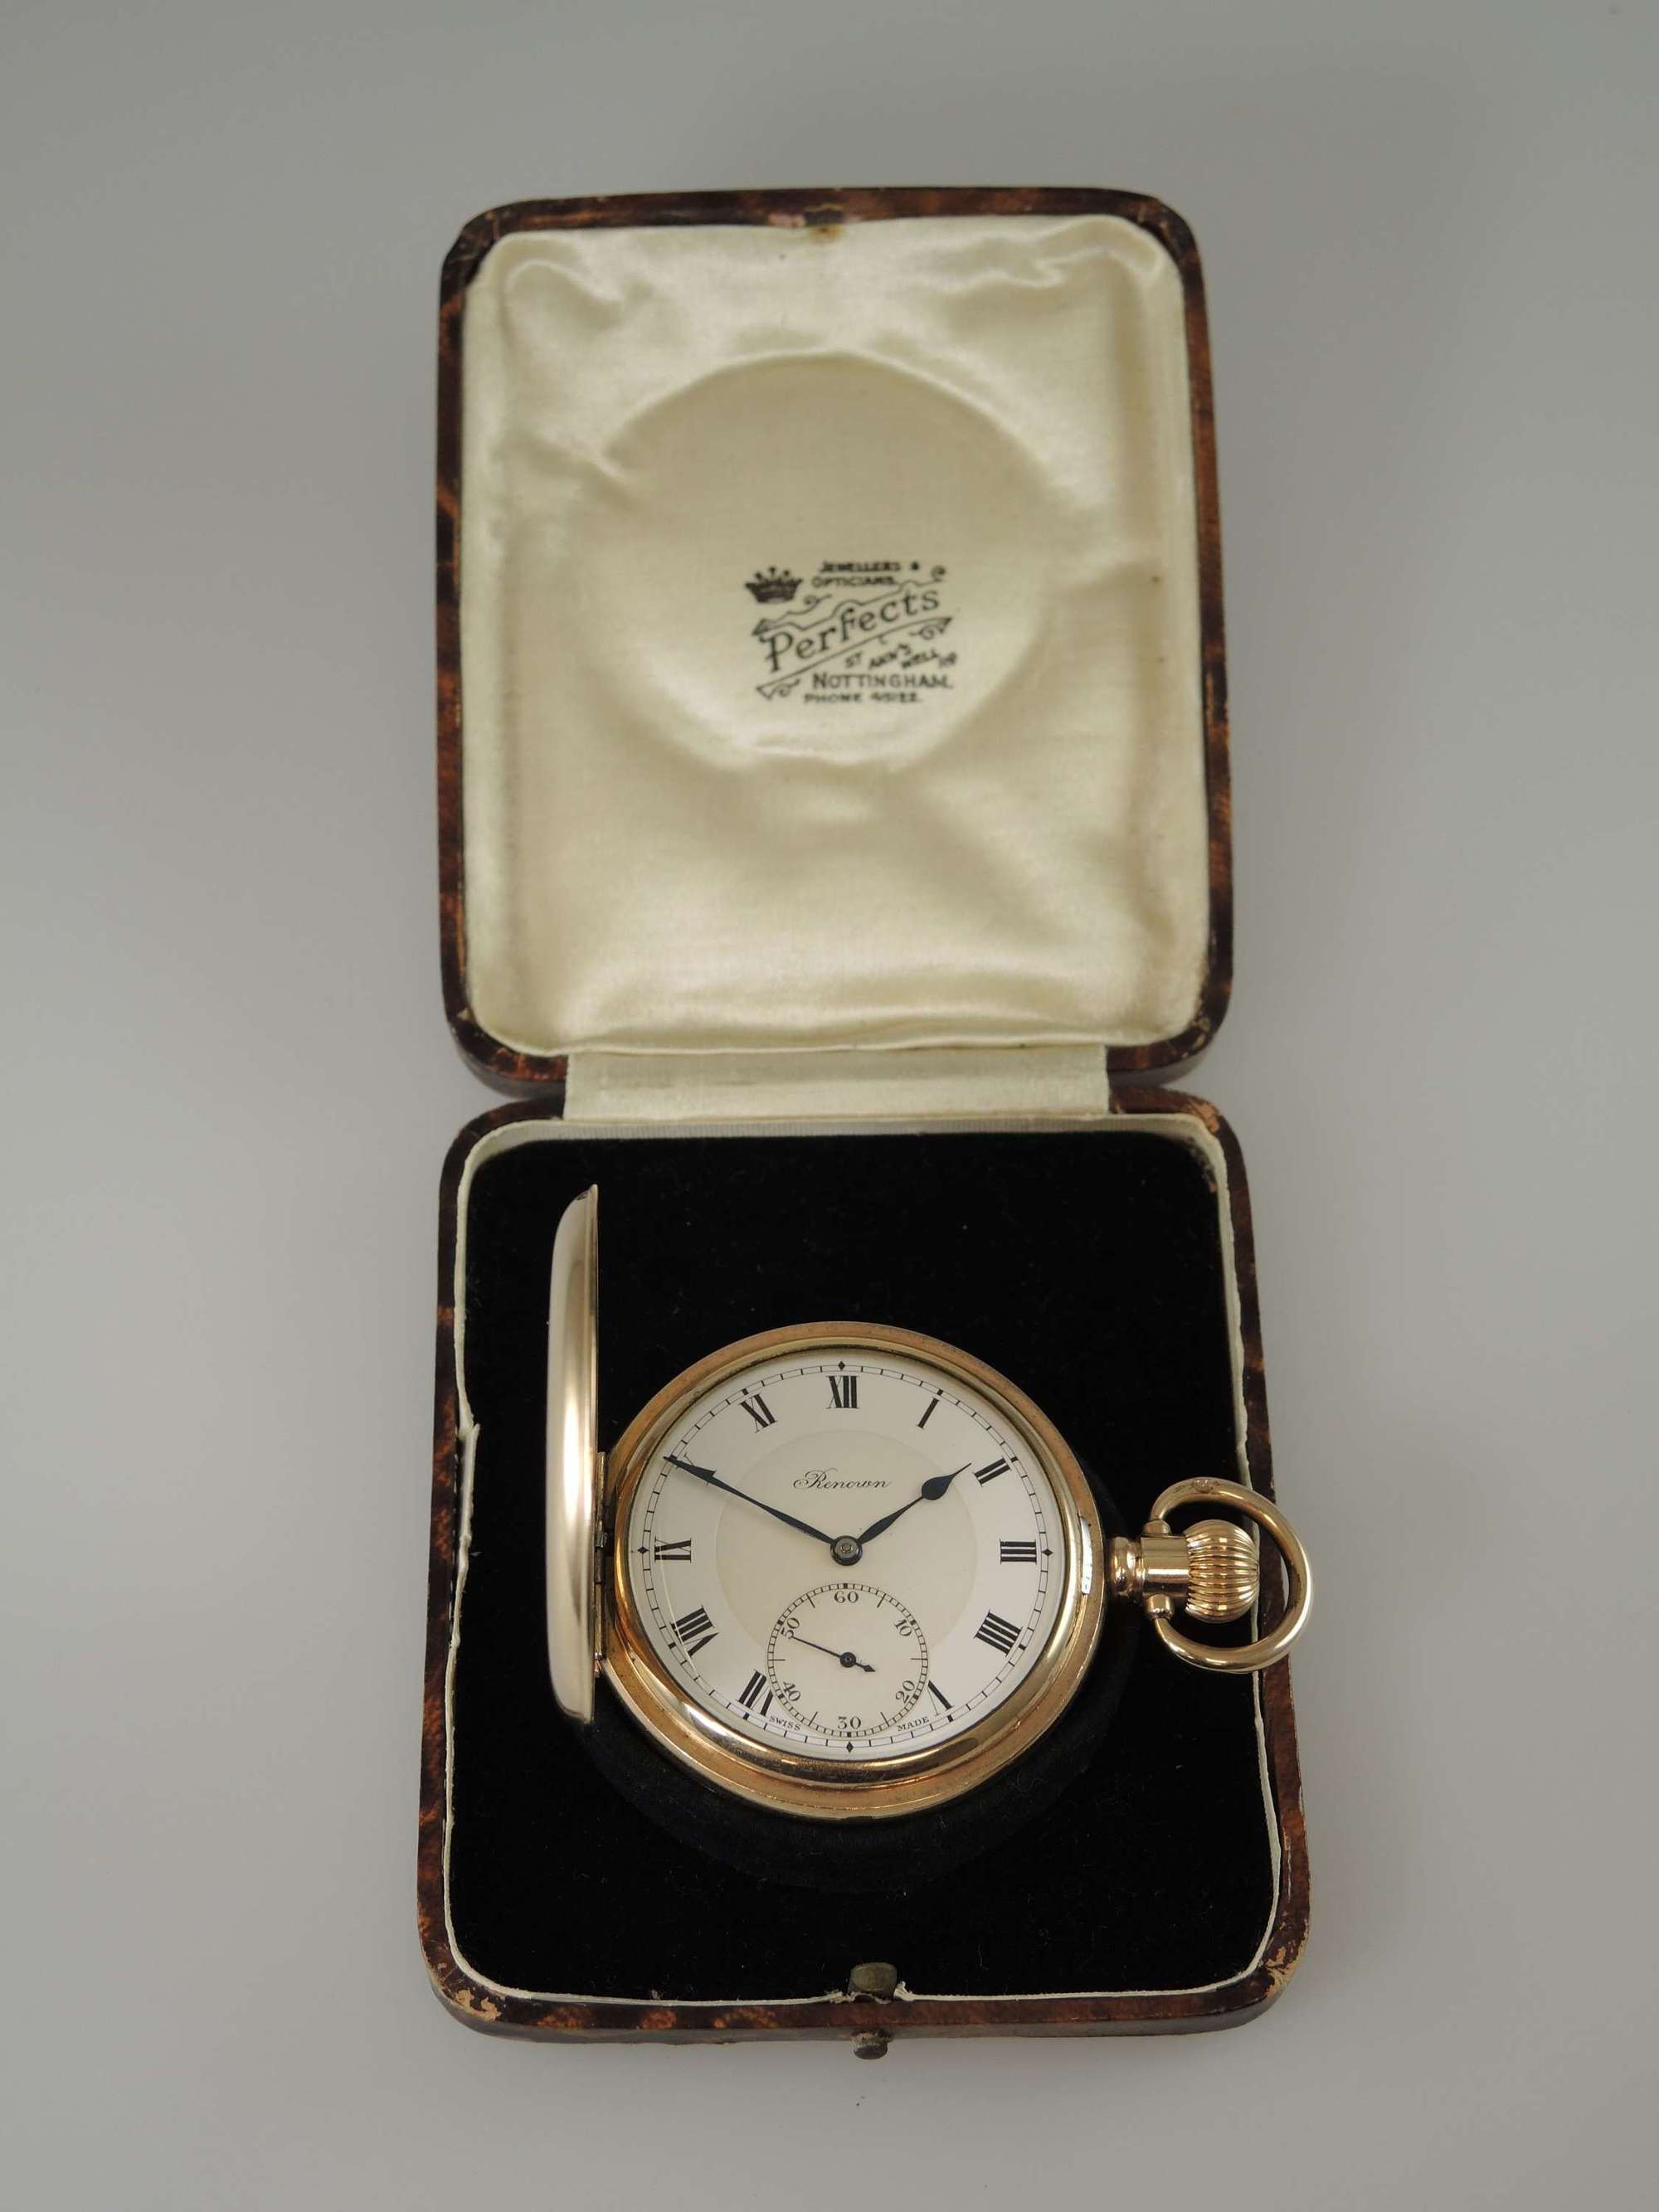 Gold plated 23 Jewel full hunter pocket watch by Renown c1920